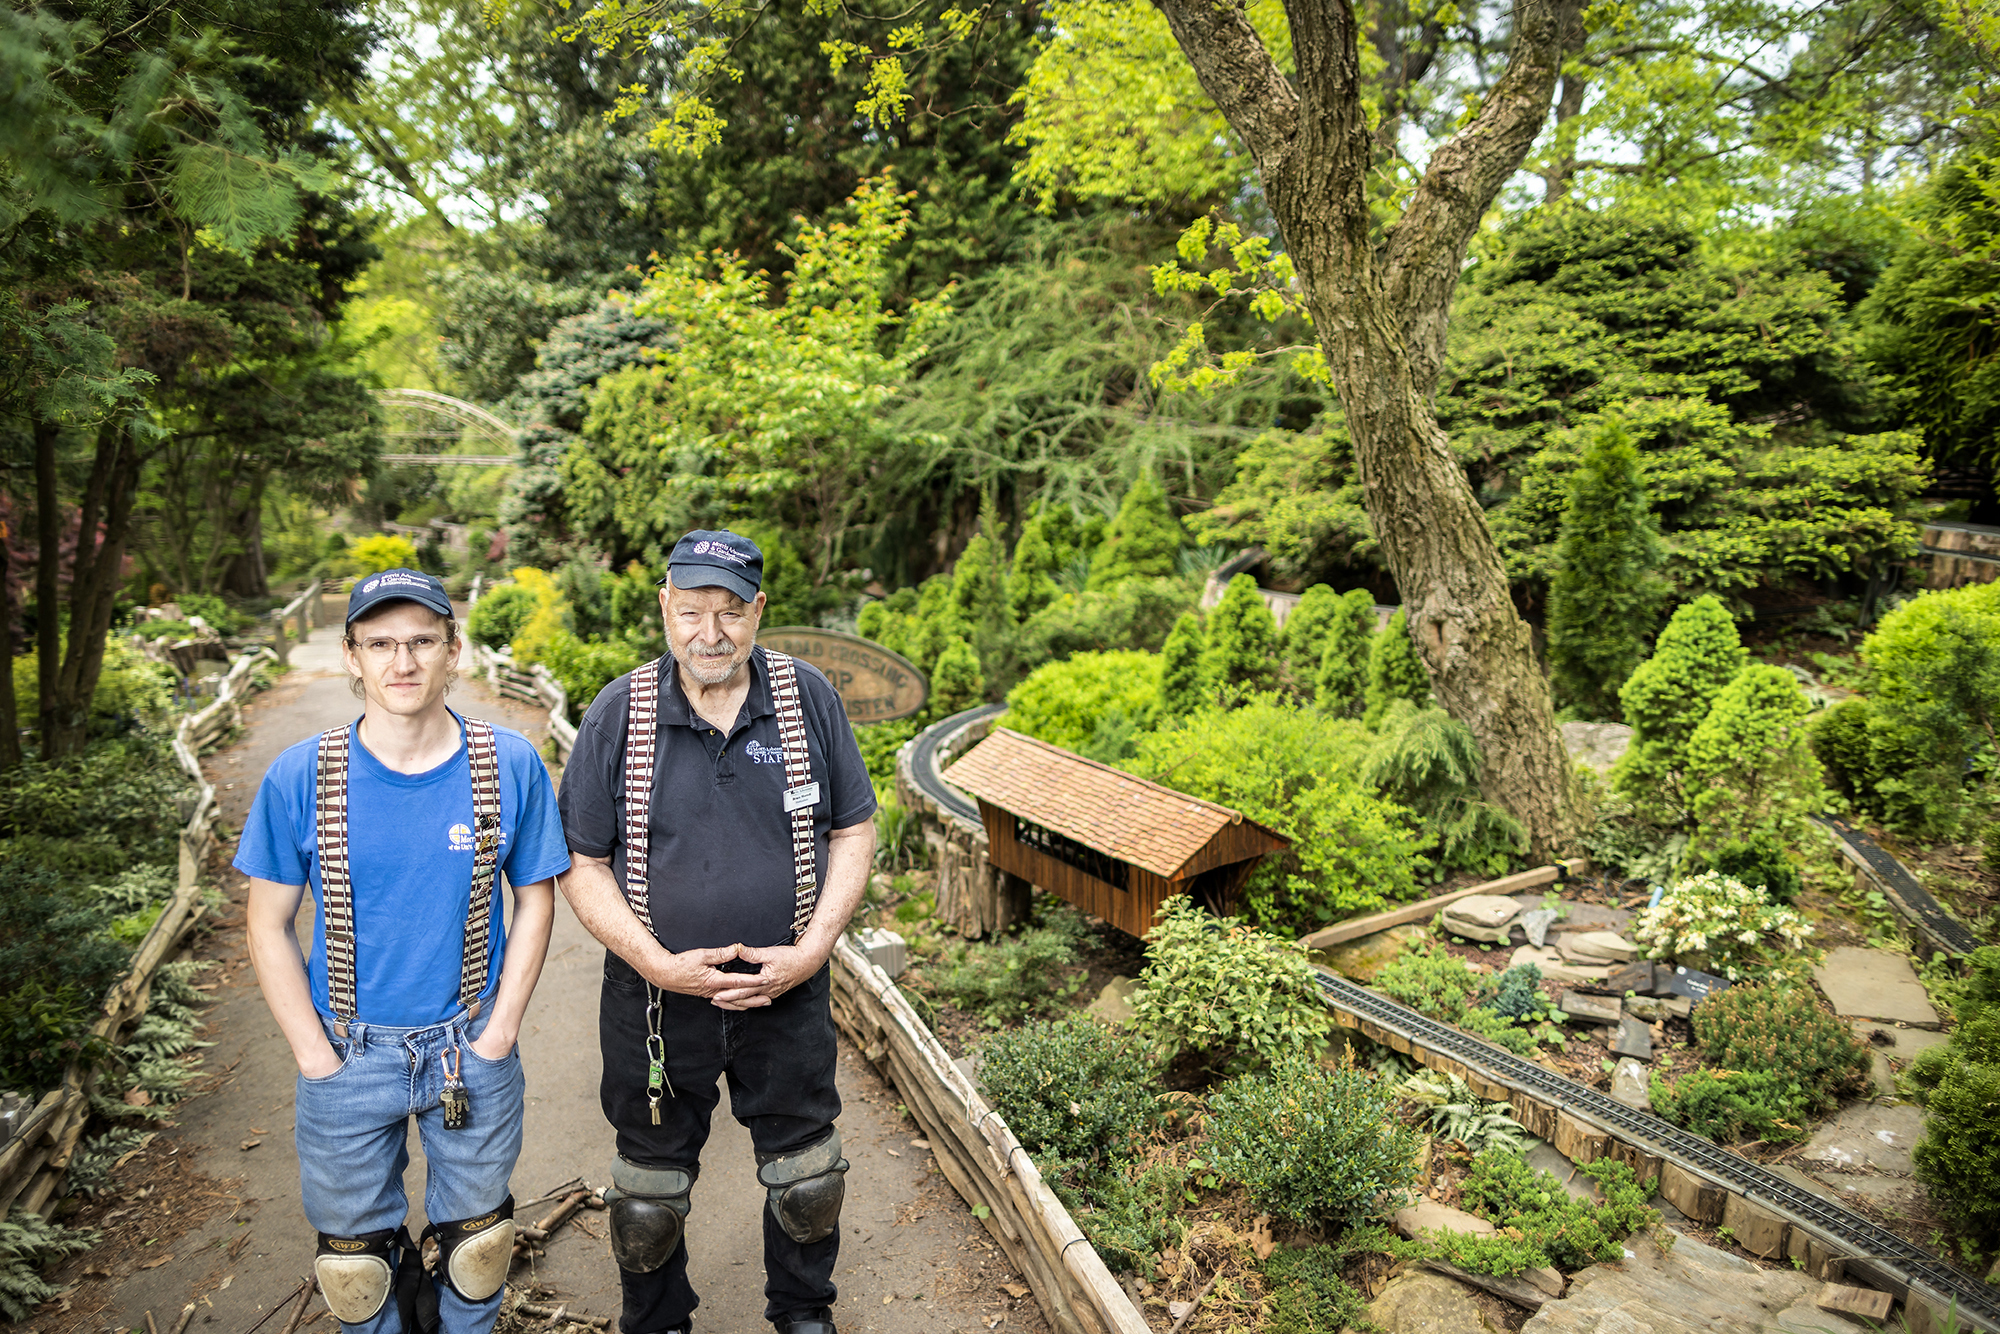 Josh Faia and Bruce Morrell standing next to garden railway surrounded by trees and foliage. 